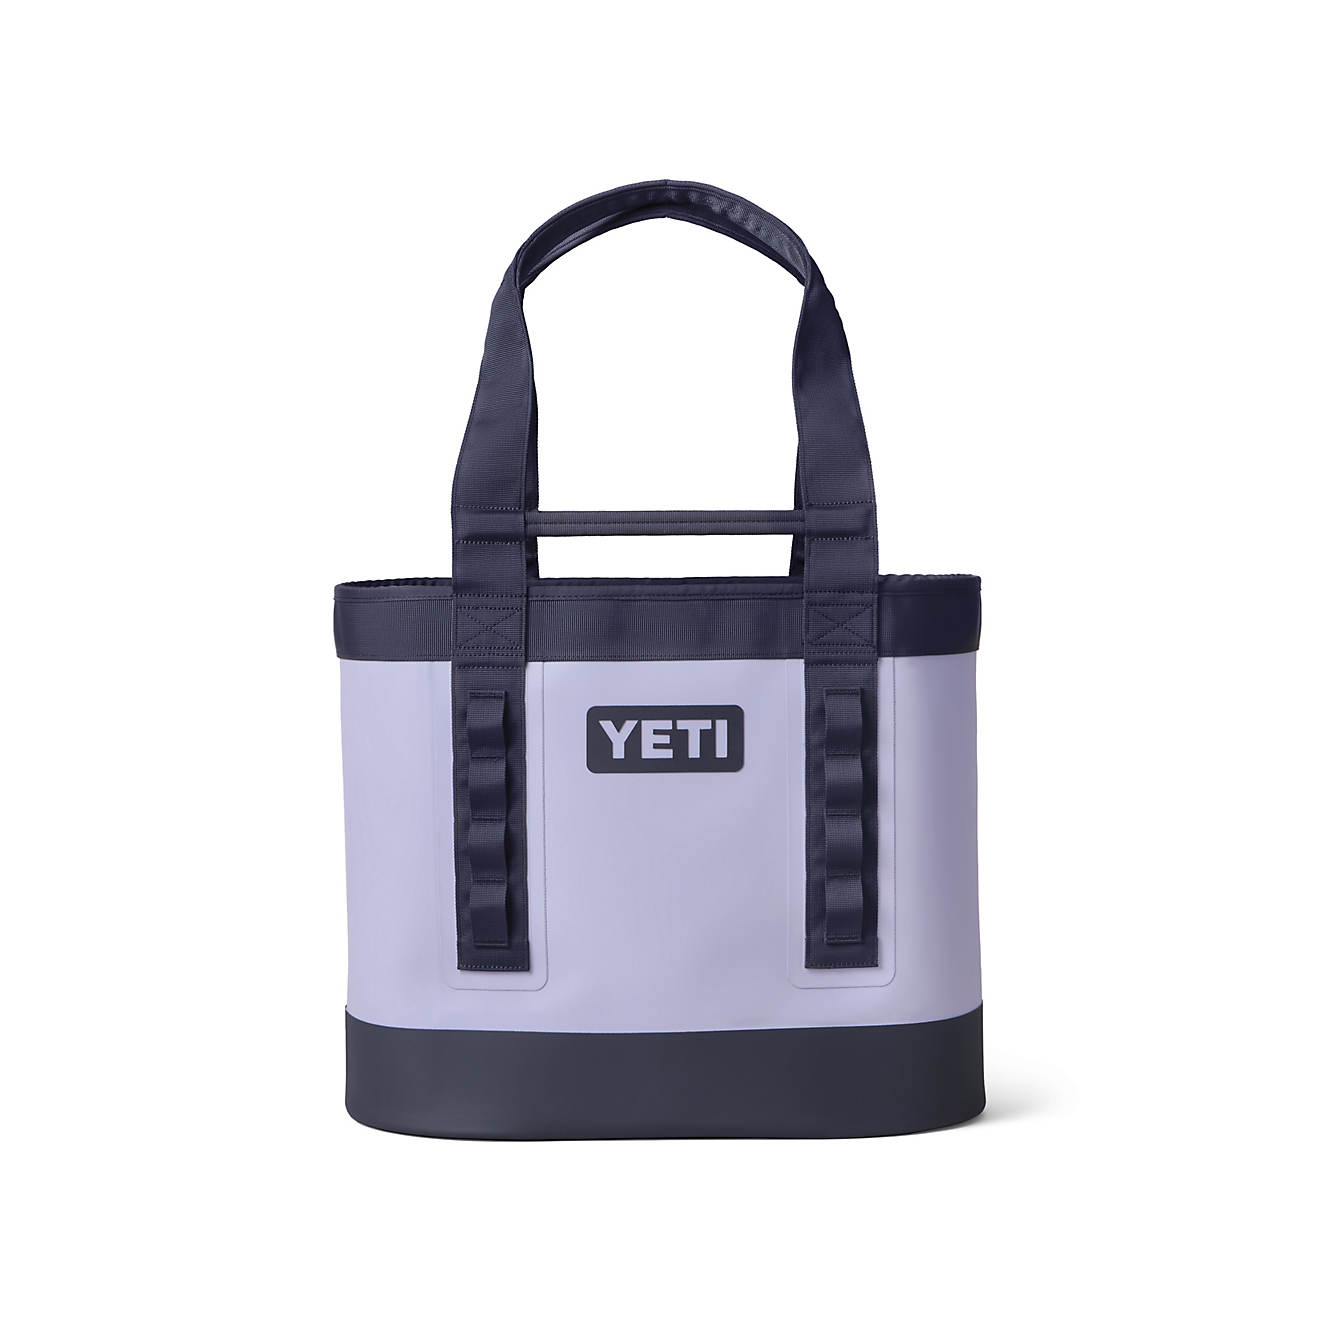 https://academy.scene7.com/is/image/academy//bags---backpacks/yeti-camino-carryall-35-tote-bag-18060131221-purple/f64d16c4e8ed43be952fbe60e63eddc2?$pdp-gallery-ng$